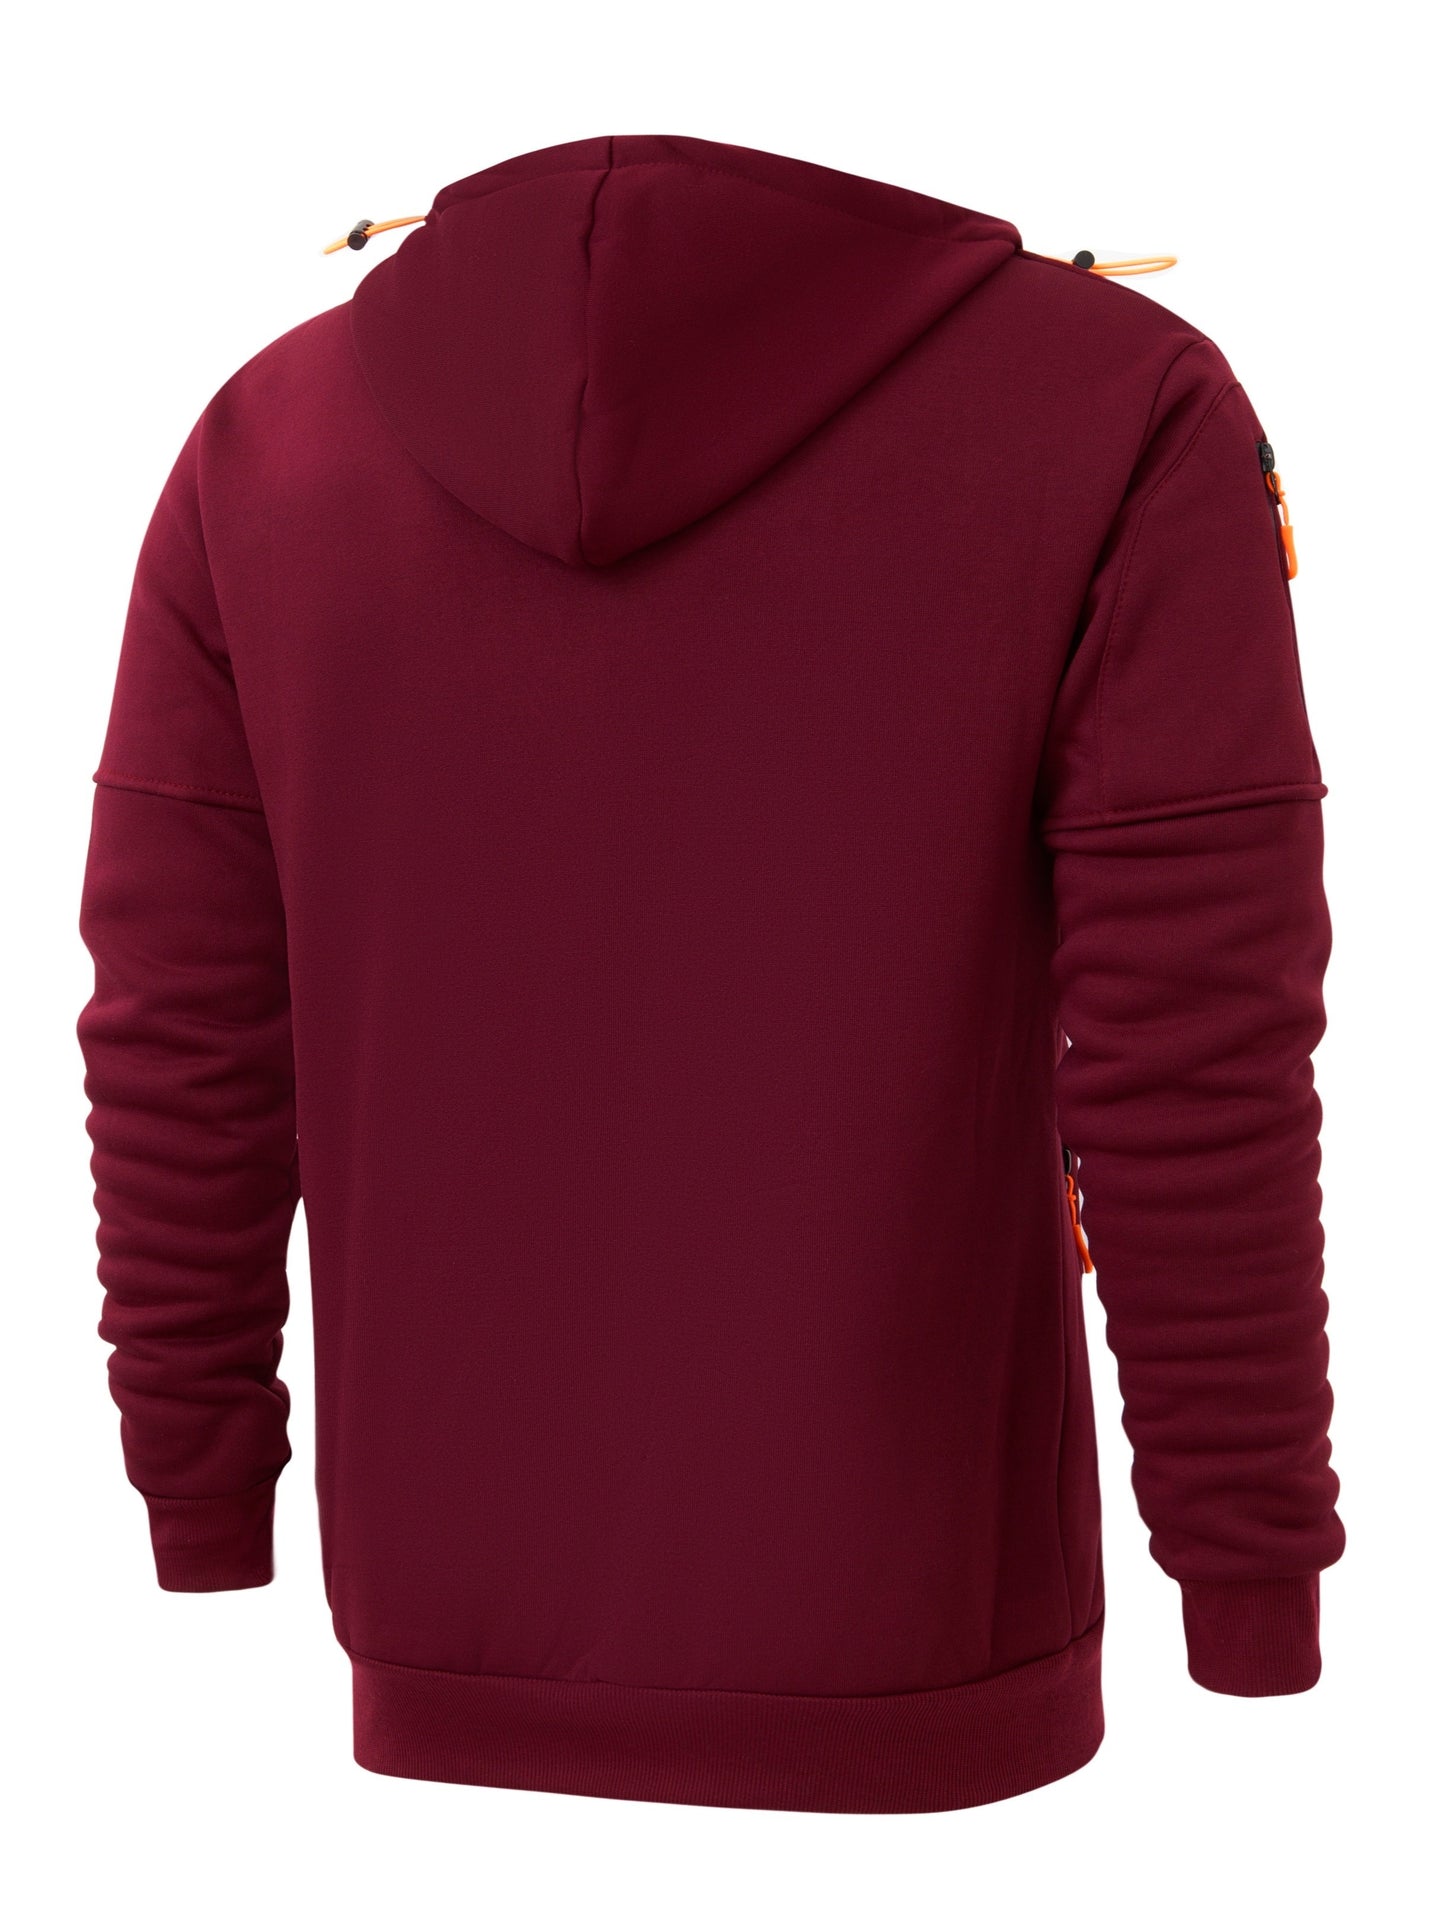 Men's Casual Long Sleeve Sports Hooded Jacket With Full Zip